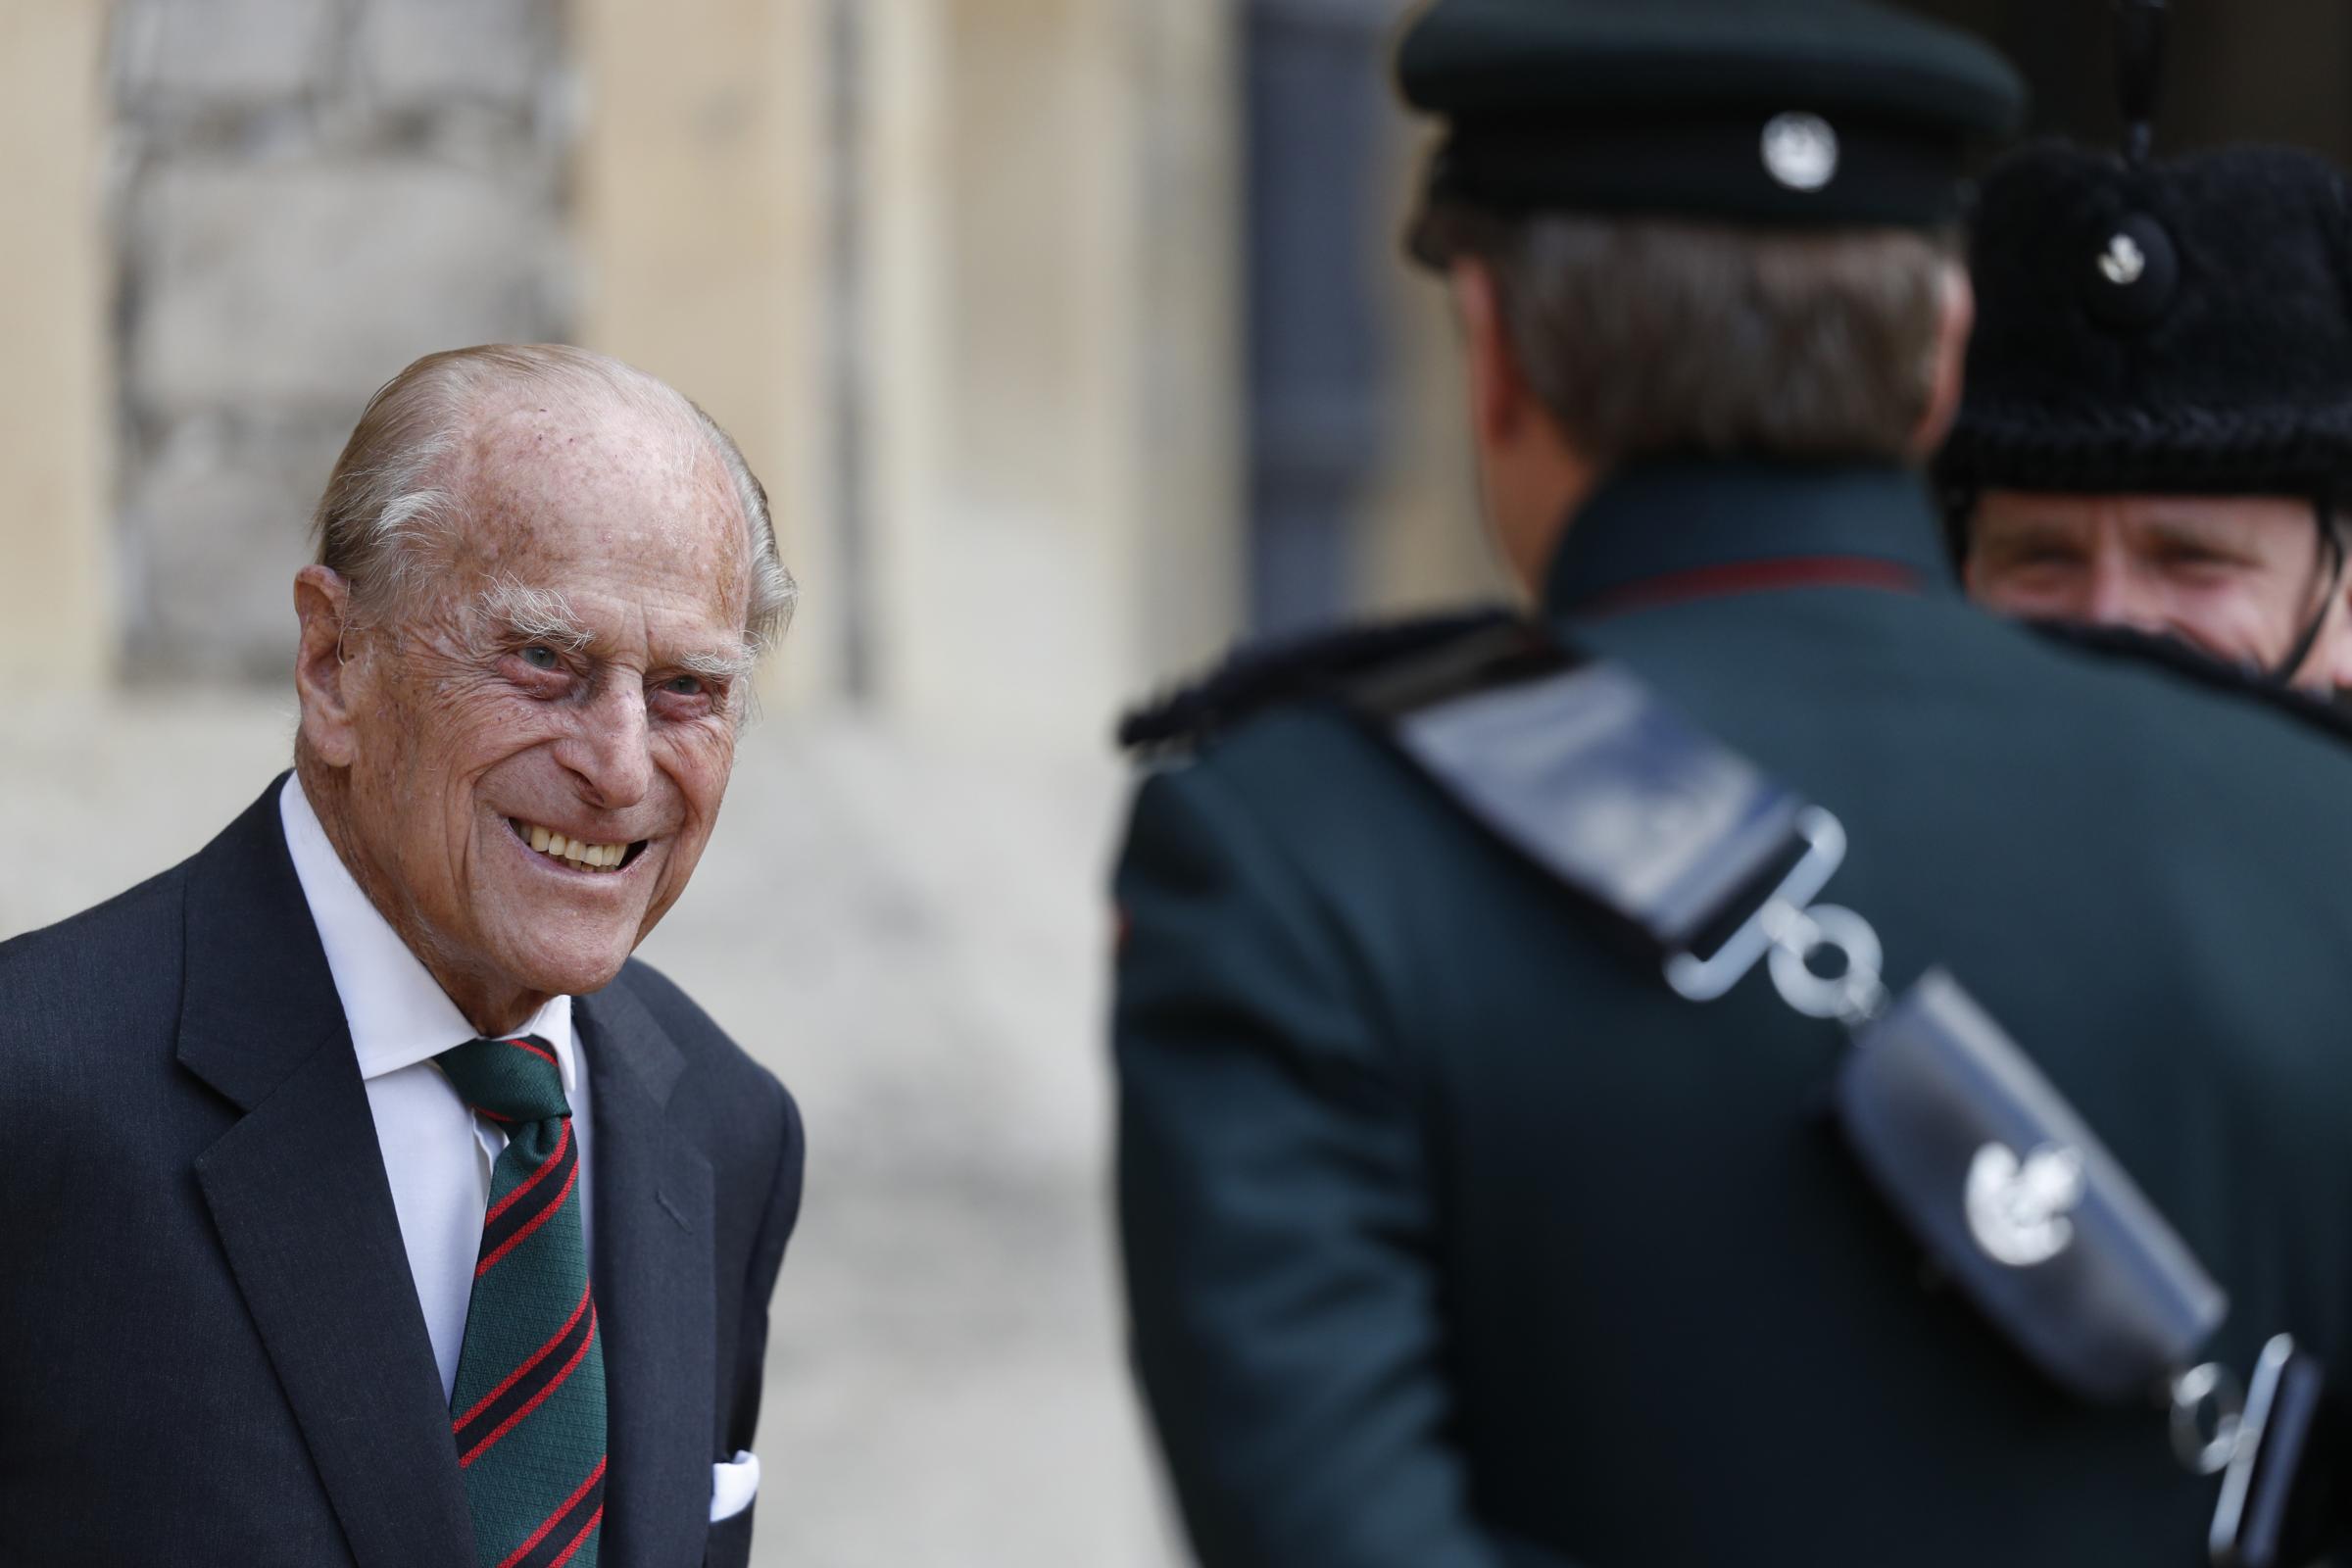 The Duke of Edinburgh speaking to a bugler at Windsor Castle during a ceremony for the transfer of the Colonel-in-Chief of the Rifles from the Duke to the Duchess of Cornwall. 